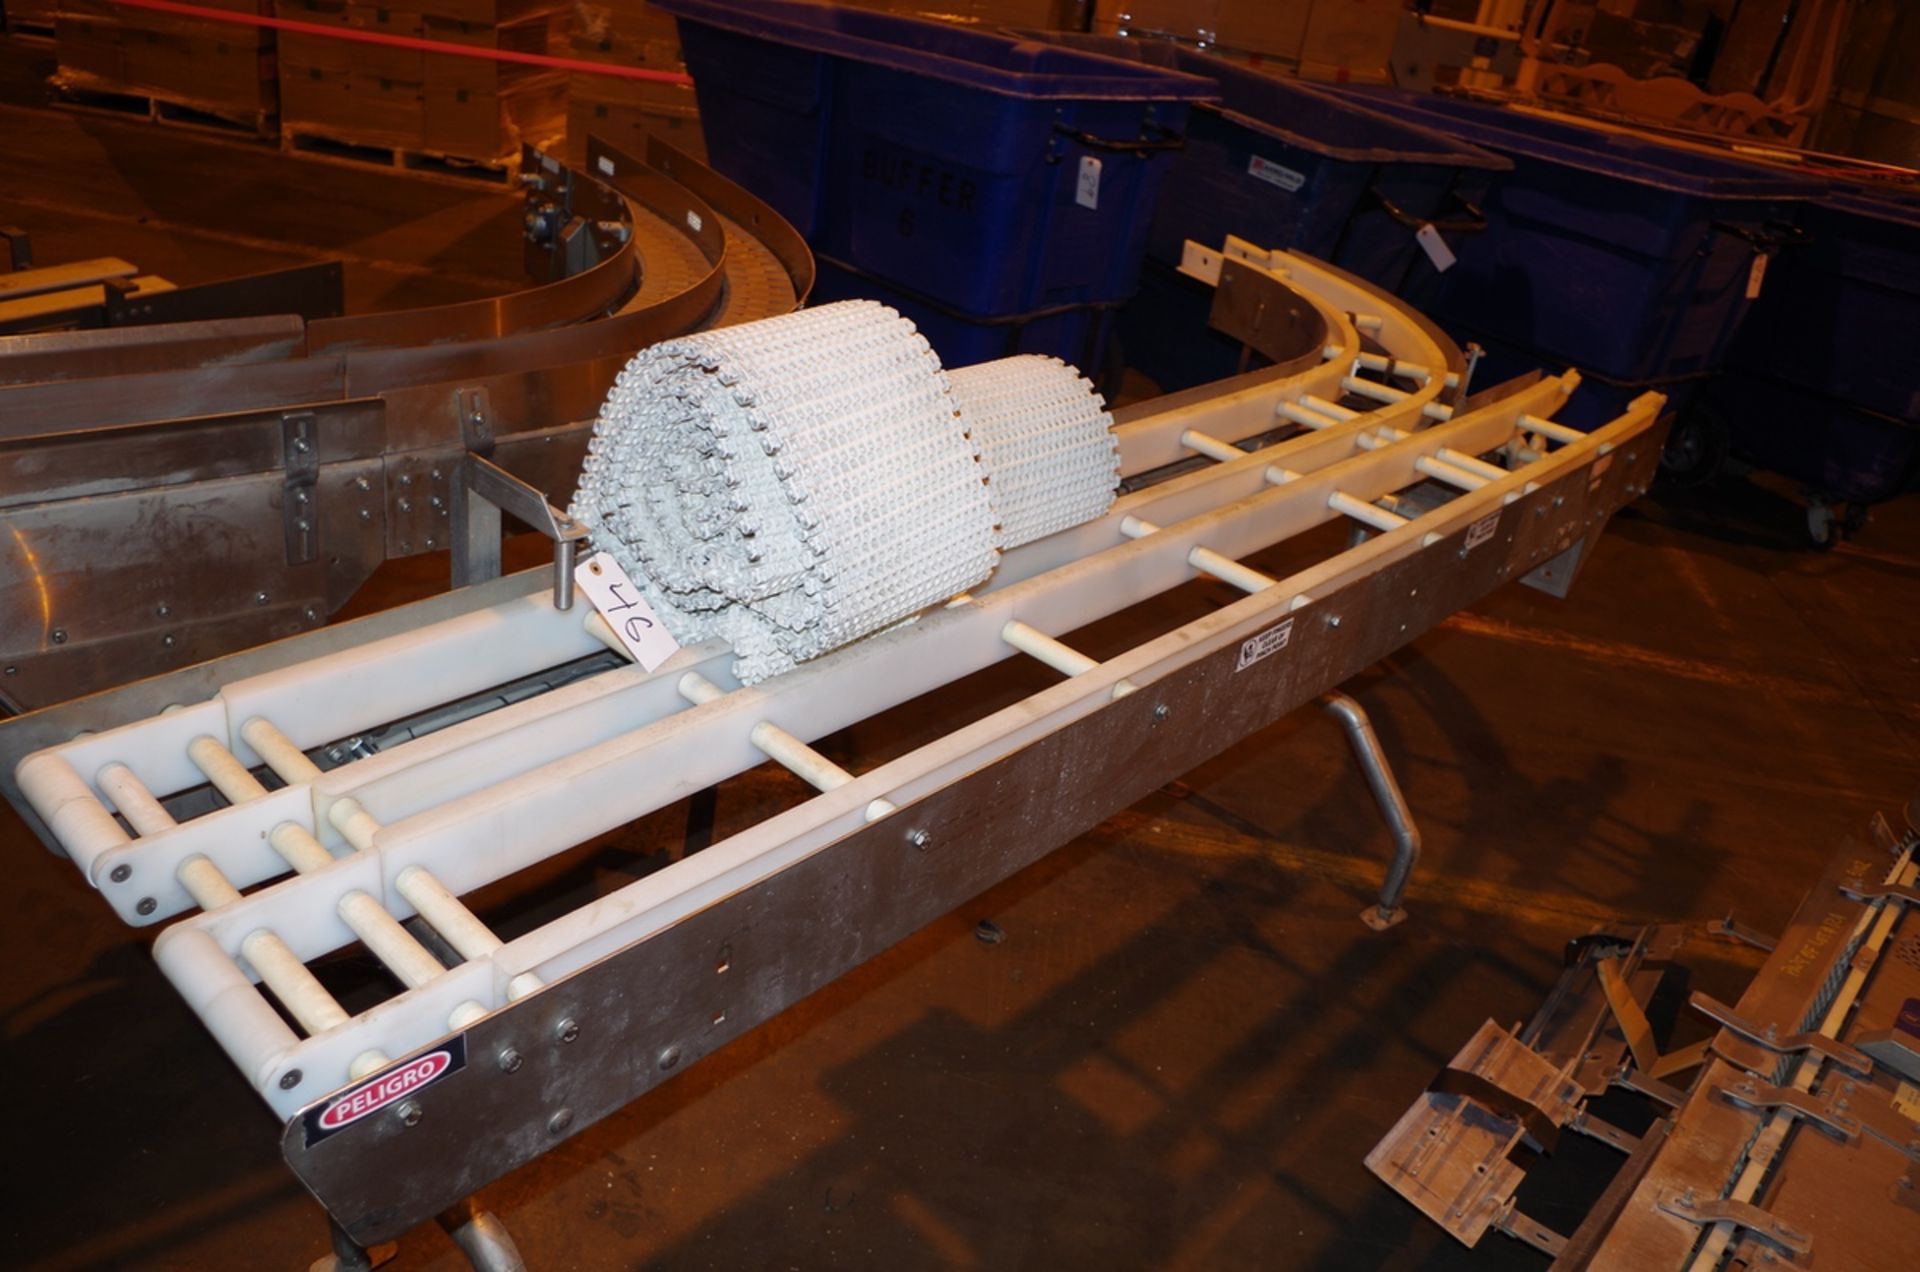 (2) Nercon Stainless Steel conveyors, 1 with drive motor | Rig Fee: $50